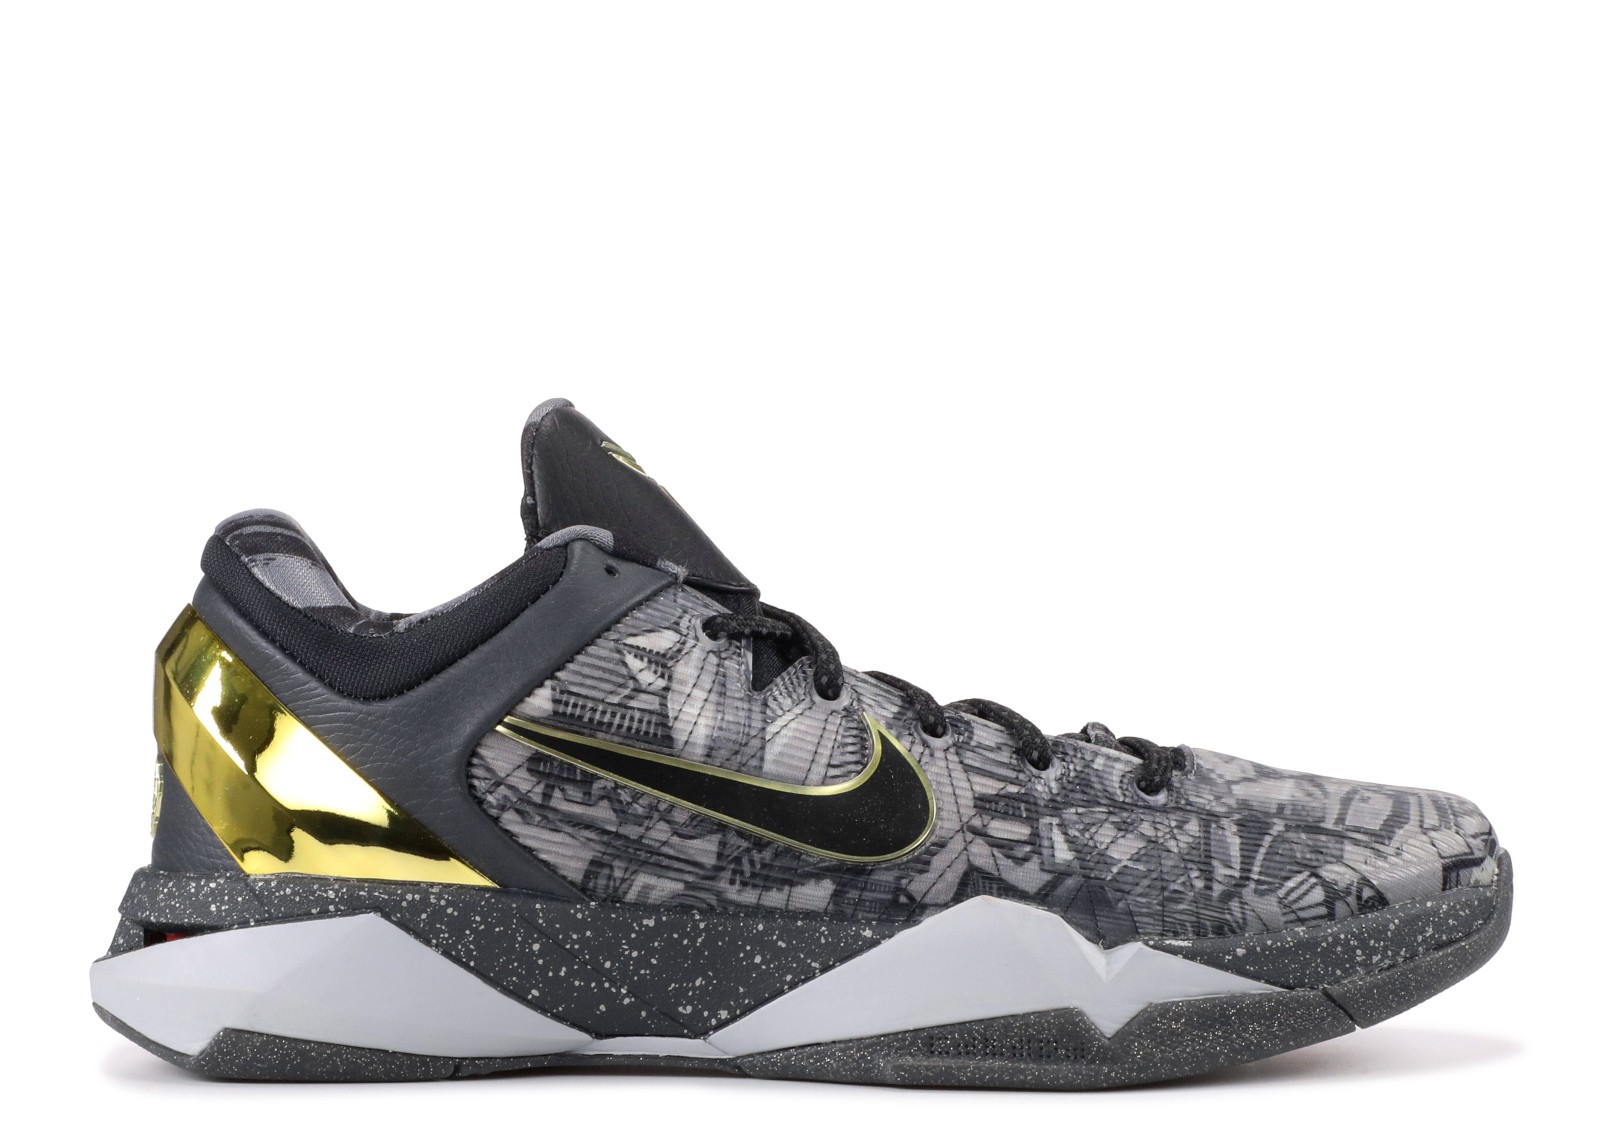 RvceShops - Zoom Kobe 7 System Yin And Yang Crt Clear Purple Gold